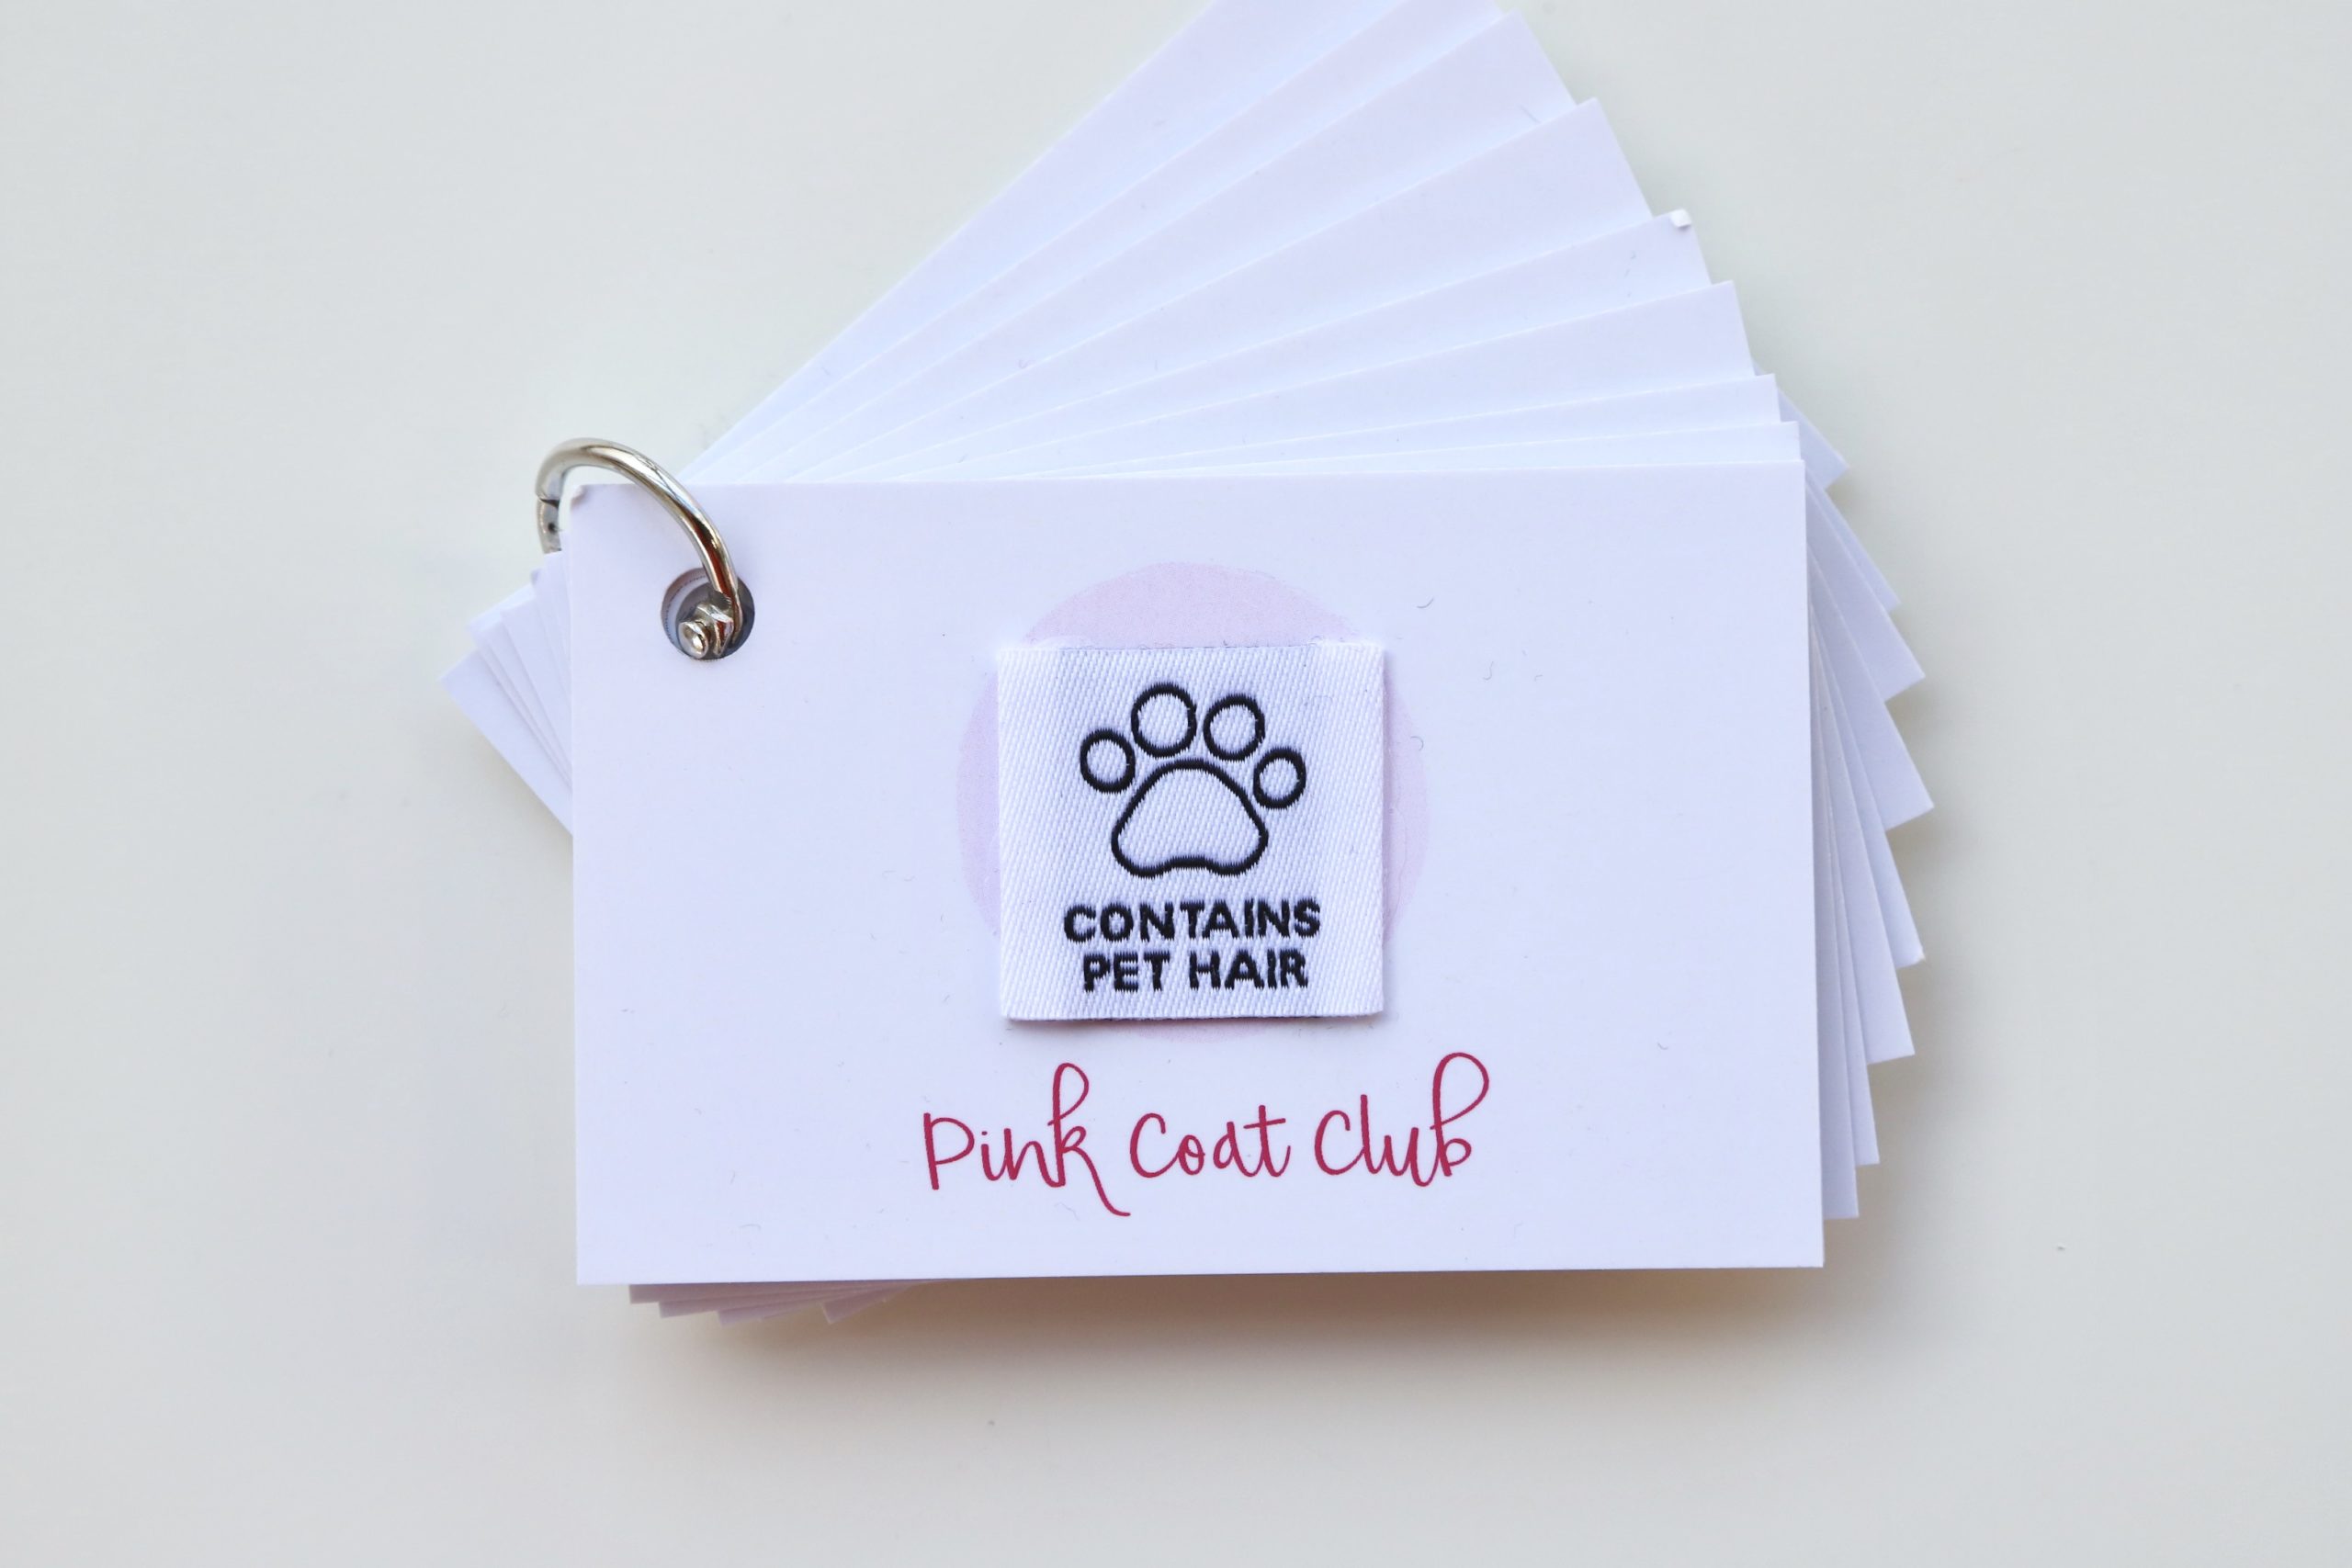 Contains Pet Hair – 6 Garment Labels by Pink Coat Club